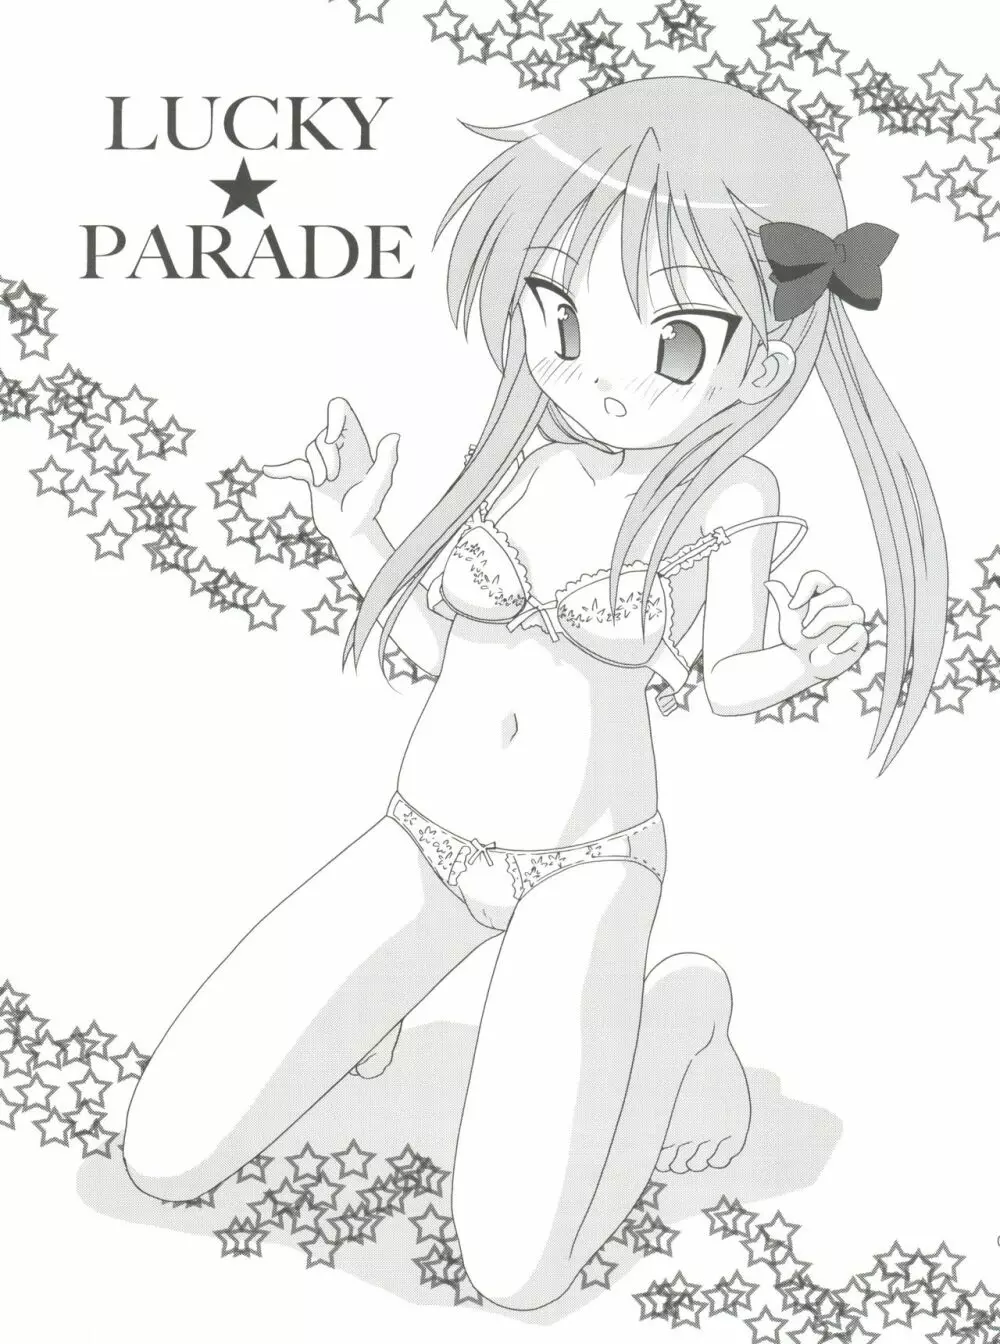 LUCKY PARADE - page2